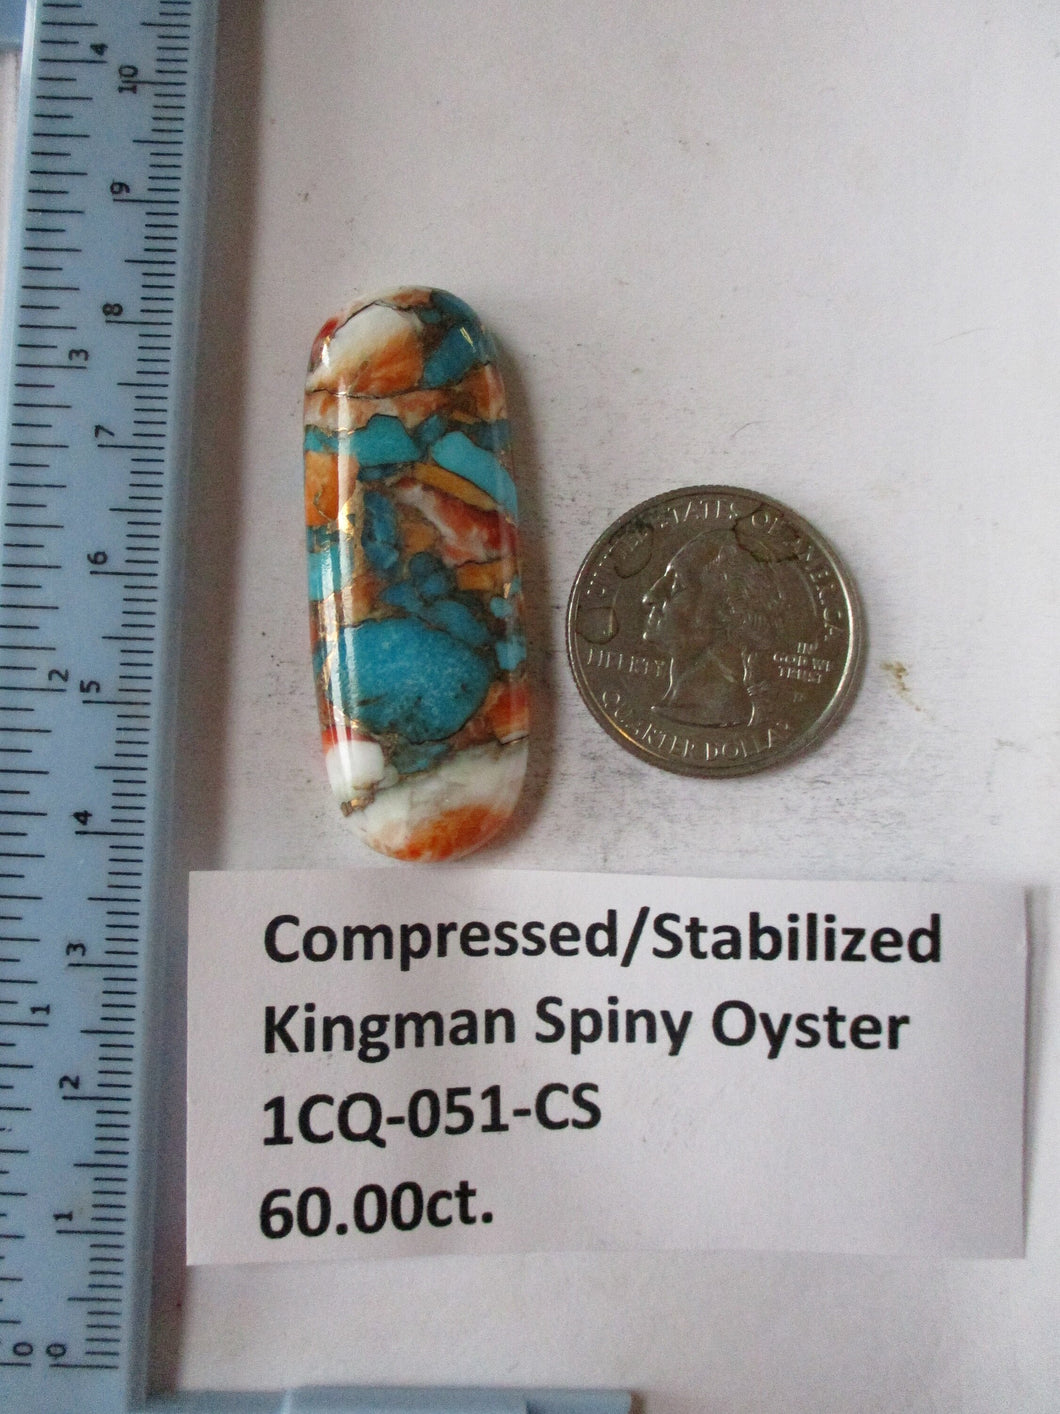 60.0 ct. (47x17.5x7 mm) Pressed/Stabilized Kingman Spiny Oyster Turquoise Cabochon, Gemstone, 1CQ 051